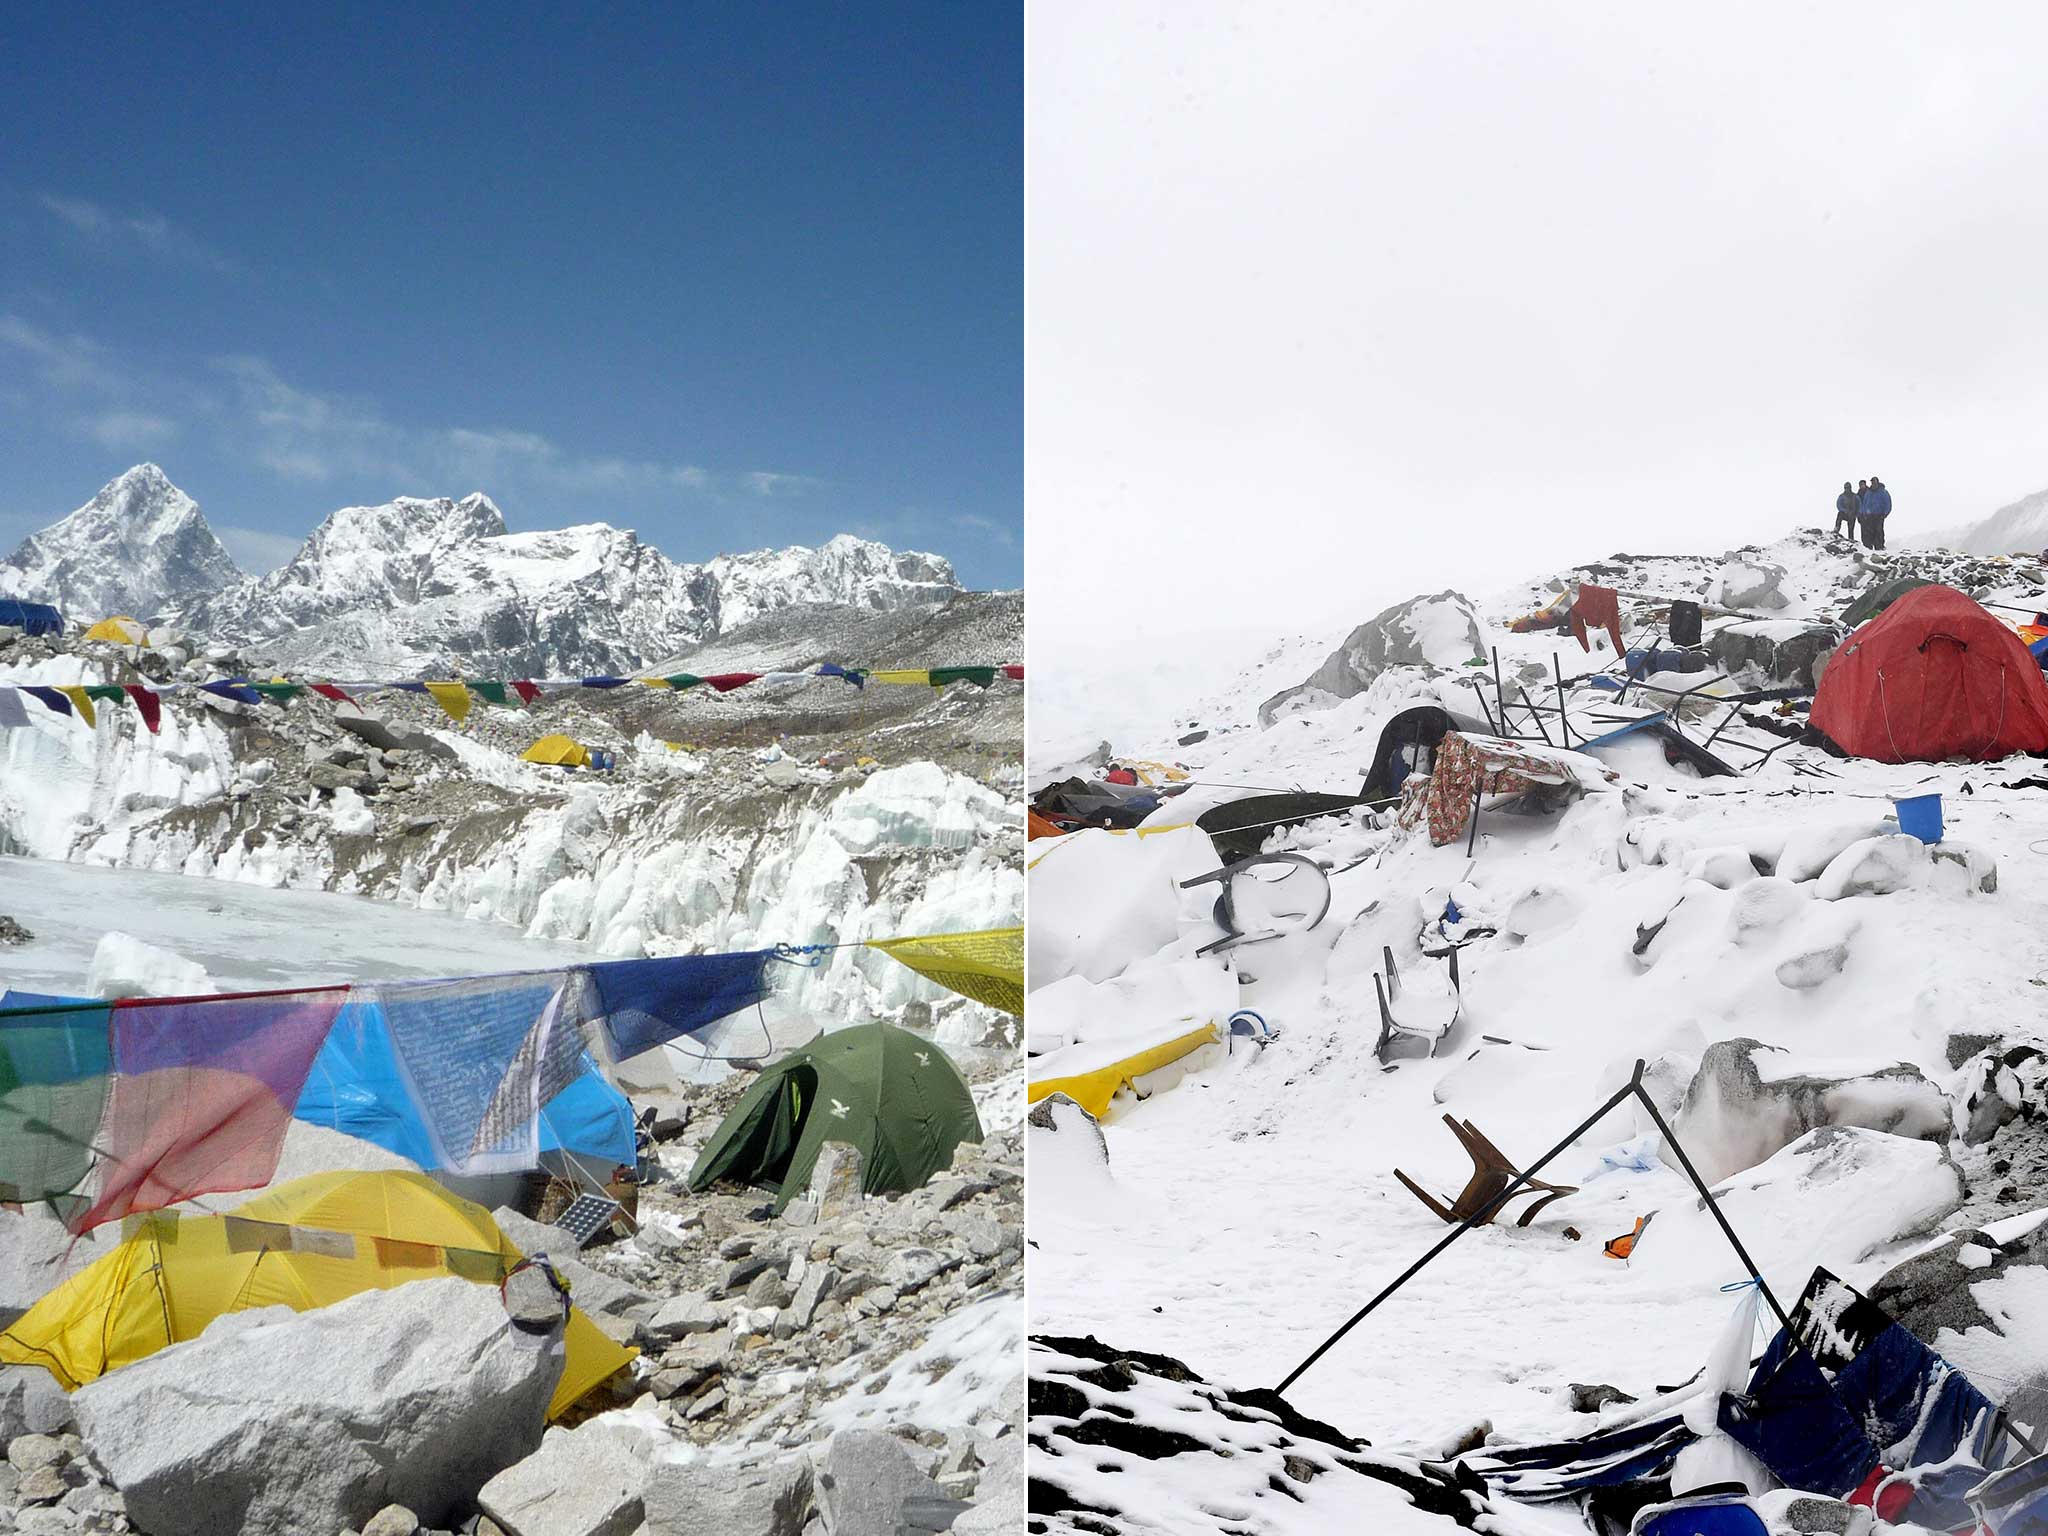 A general shot of Everest Base Camp 1 (taken 2009) and the scene after the avalanche this weekend